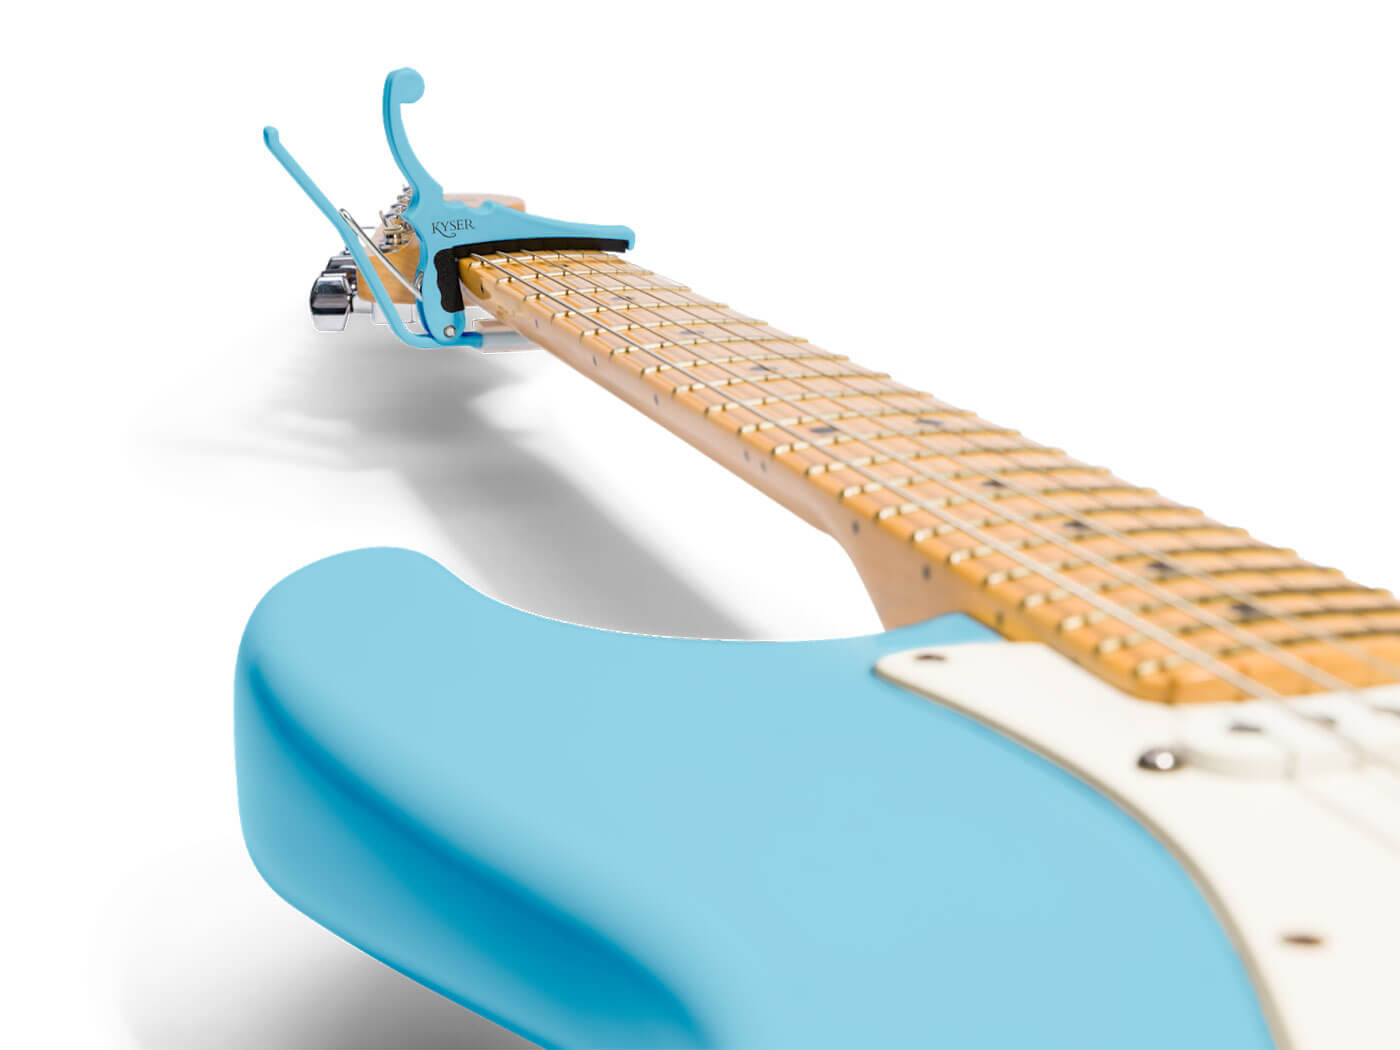 Fender's 2021 accessories include glow-in-the-dark cables, vegan leather  straps, pedalboards and more